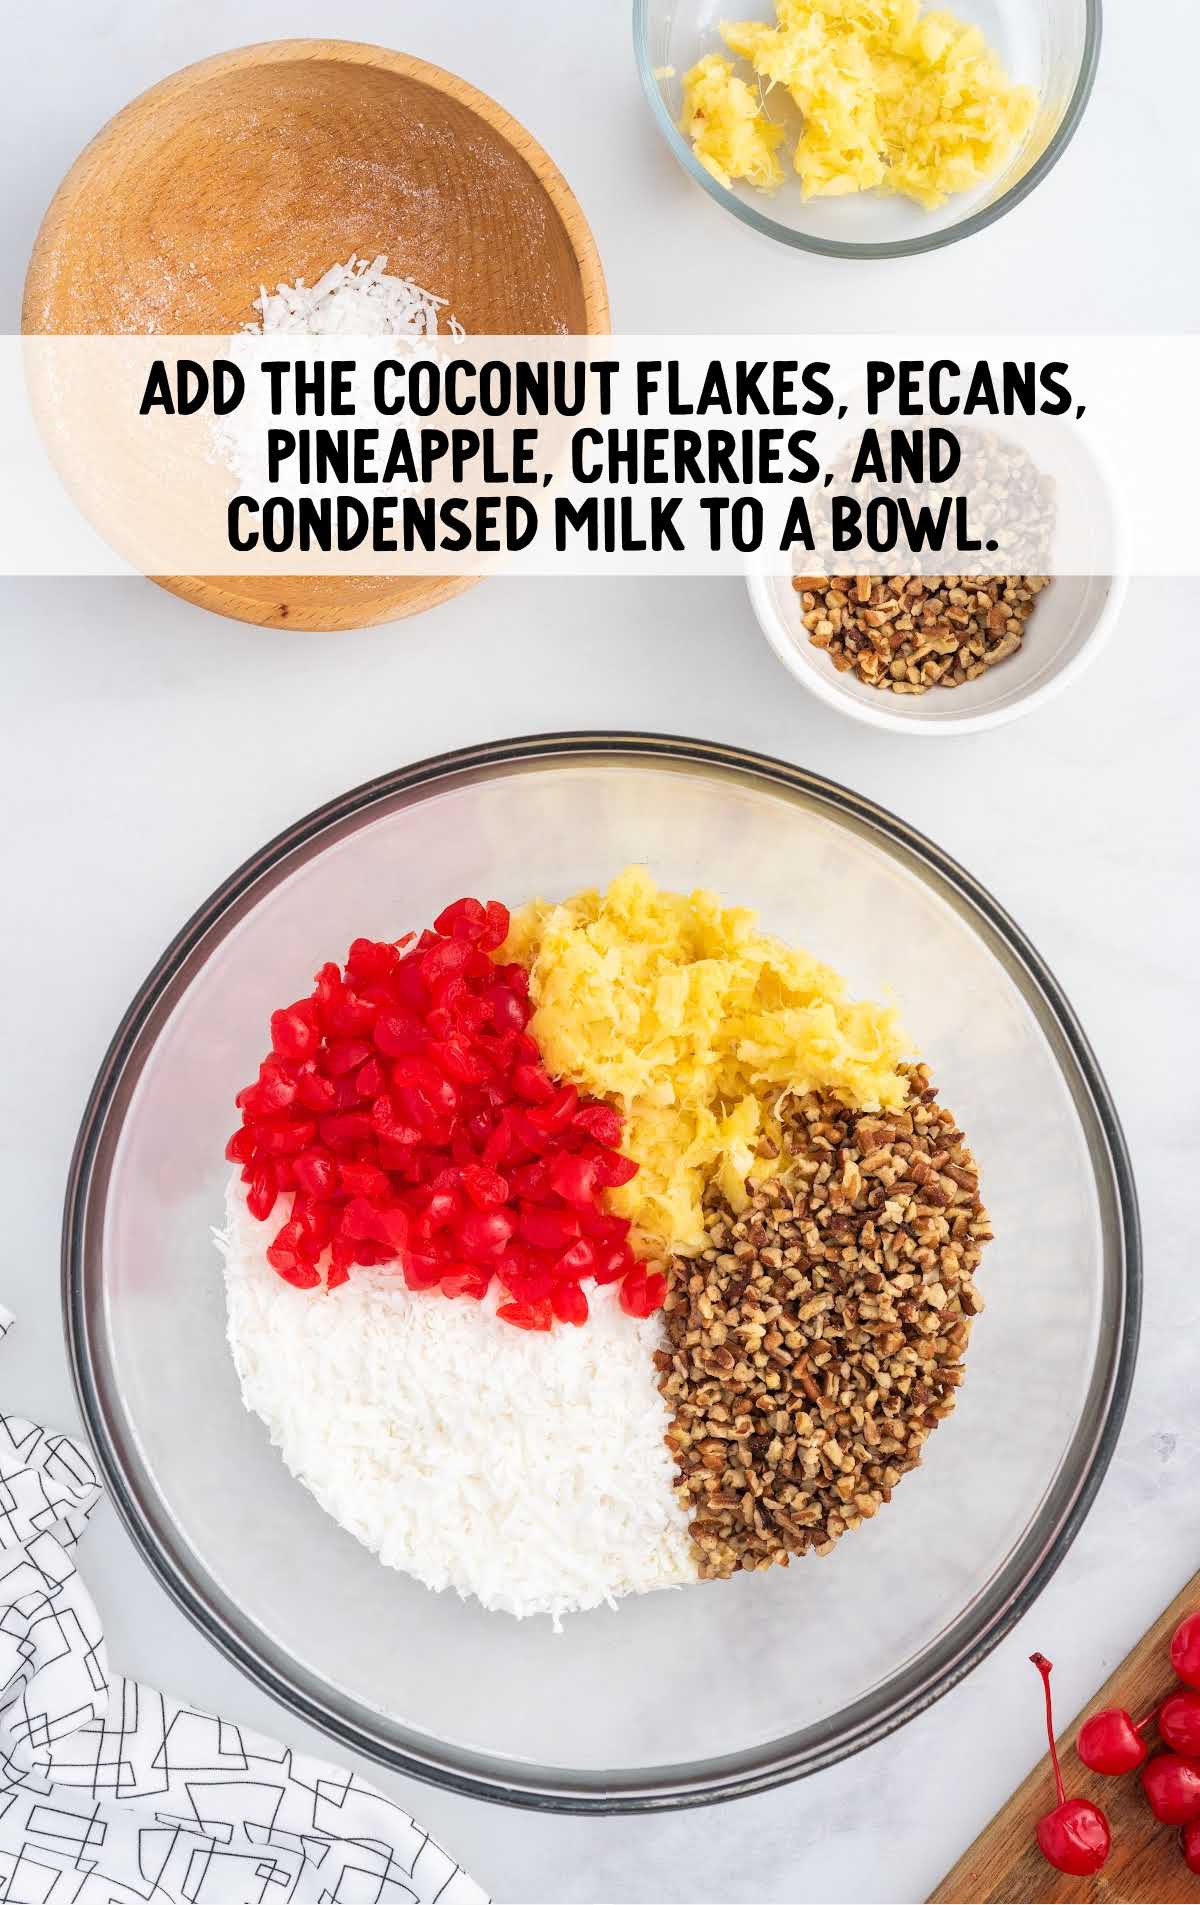 coconut flakes, pecans, pineapple, cherries, and condensed milk combined in a bowl